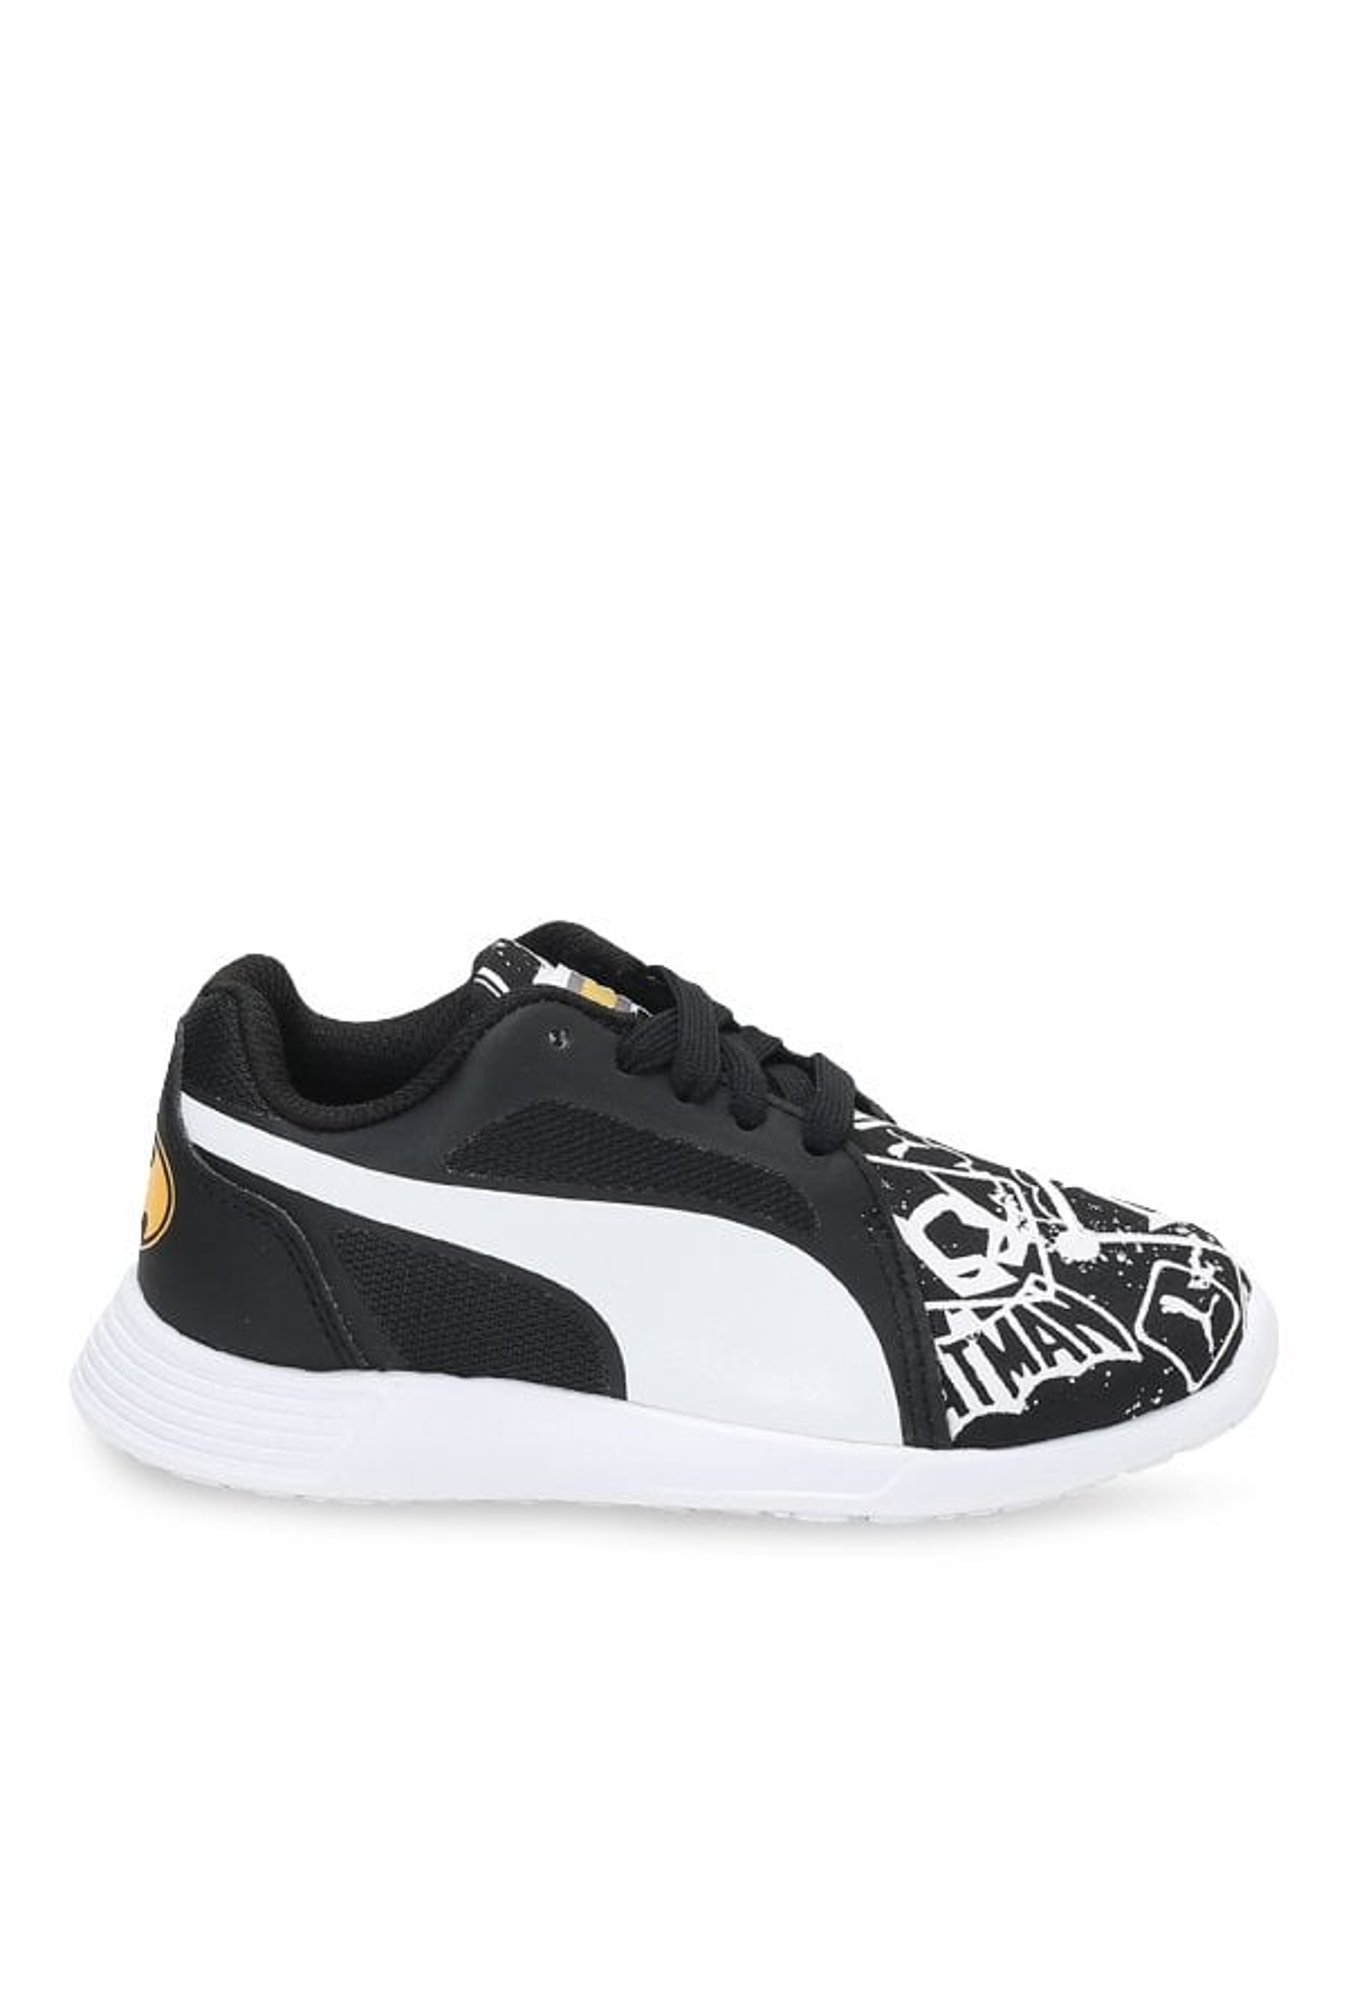 Zwitsers St Bourgeon Buy Puma Kids Batman ST Evo Street PS Black & White Training Shoes from top  Brands at Best Prices Online in India | Tata CLiQ